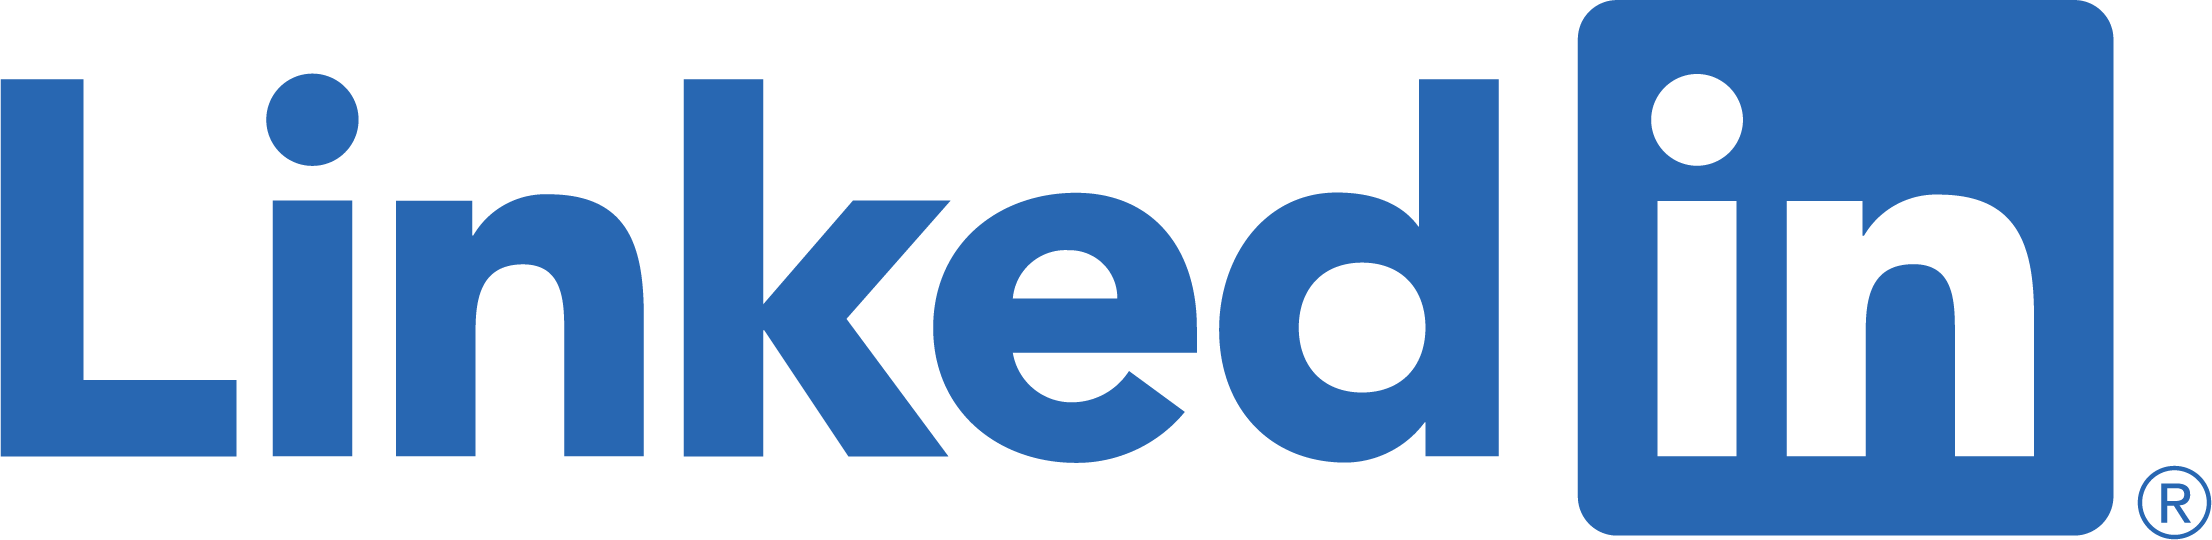 the logo for linkedin, which is blue text which reads "linked" and a blue box with white text that reads "in"